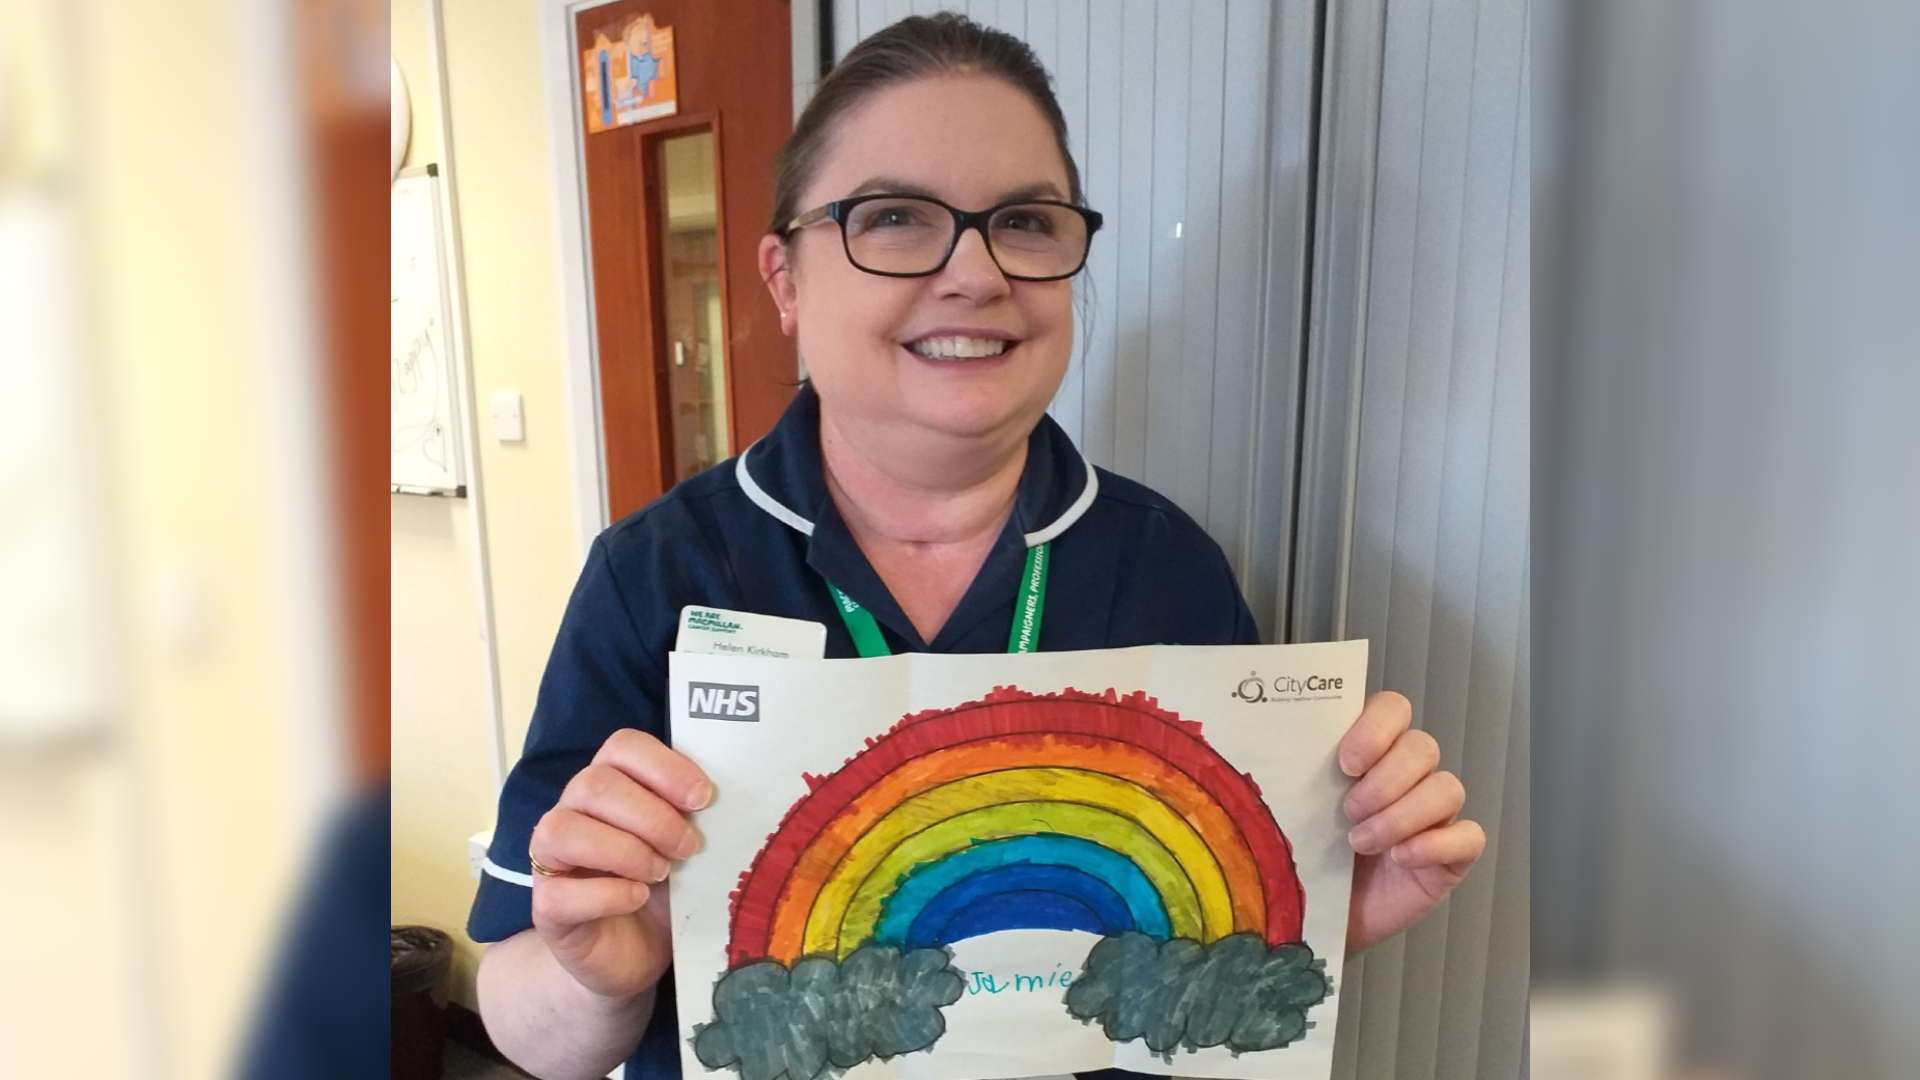 Woman in nurse's uniform with tracheostomy scar stands holding a drawn picture of a rainbow